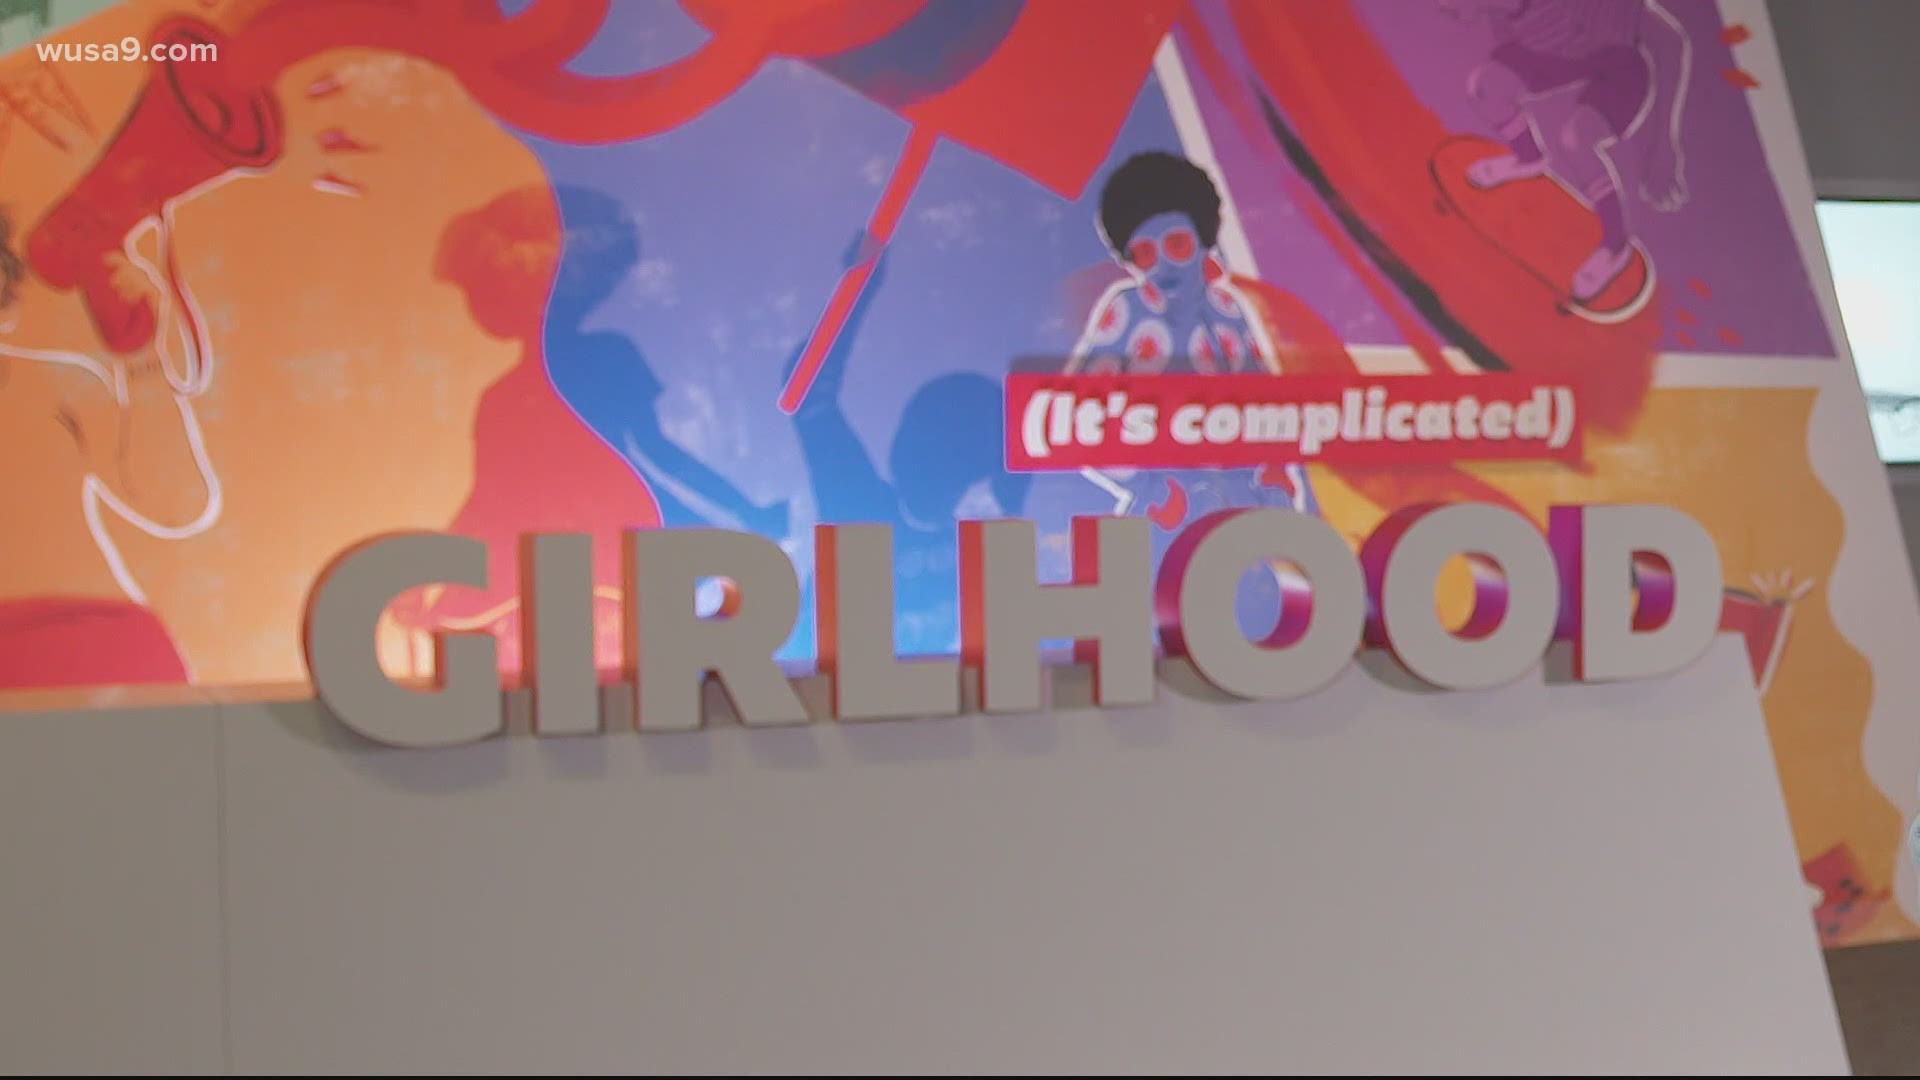 The exhibit is called Girlhood (It's Complicated). It opens Friday.